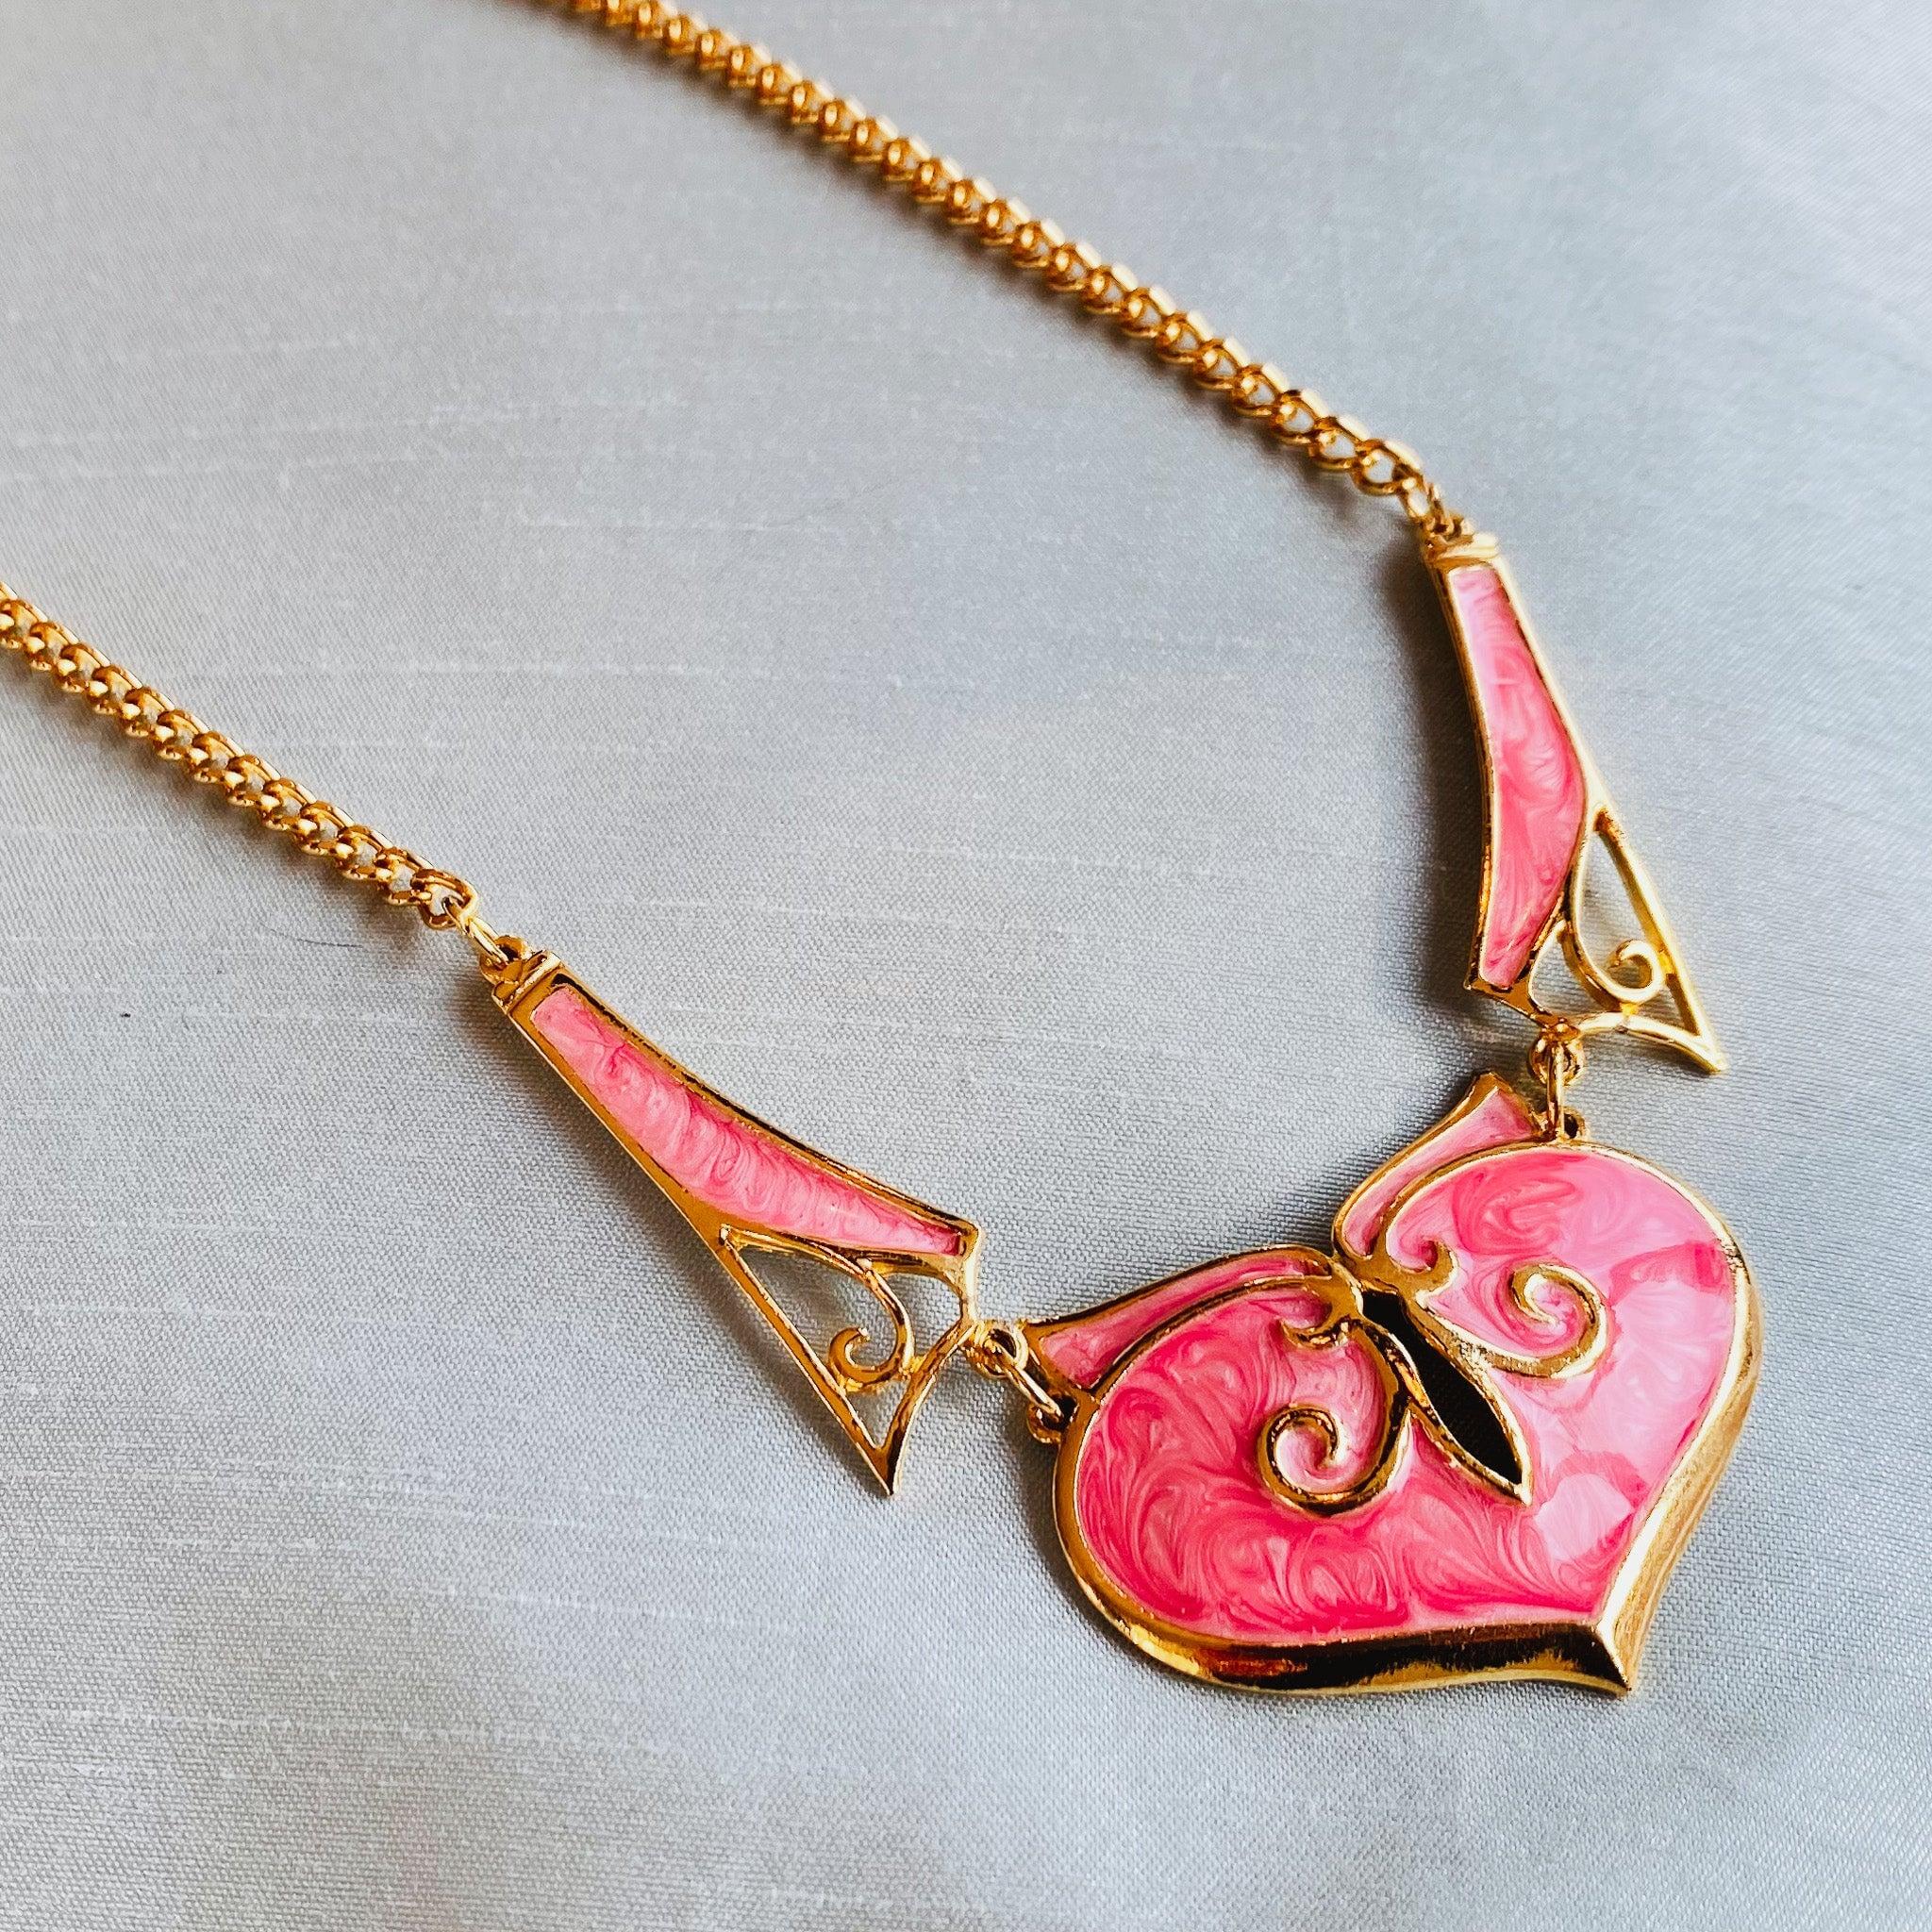 Vintage 1980s Necklace

Meet this incredible vintage 1980s necklace, made in the UK from 18 carat gold plate and inlaid with barbie pink enamel.

This necklace is a deadstock item, made in the 1980s but remained packaged up and unworn. This necklace